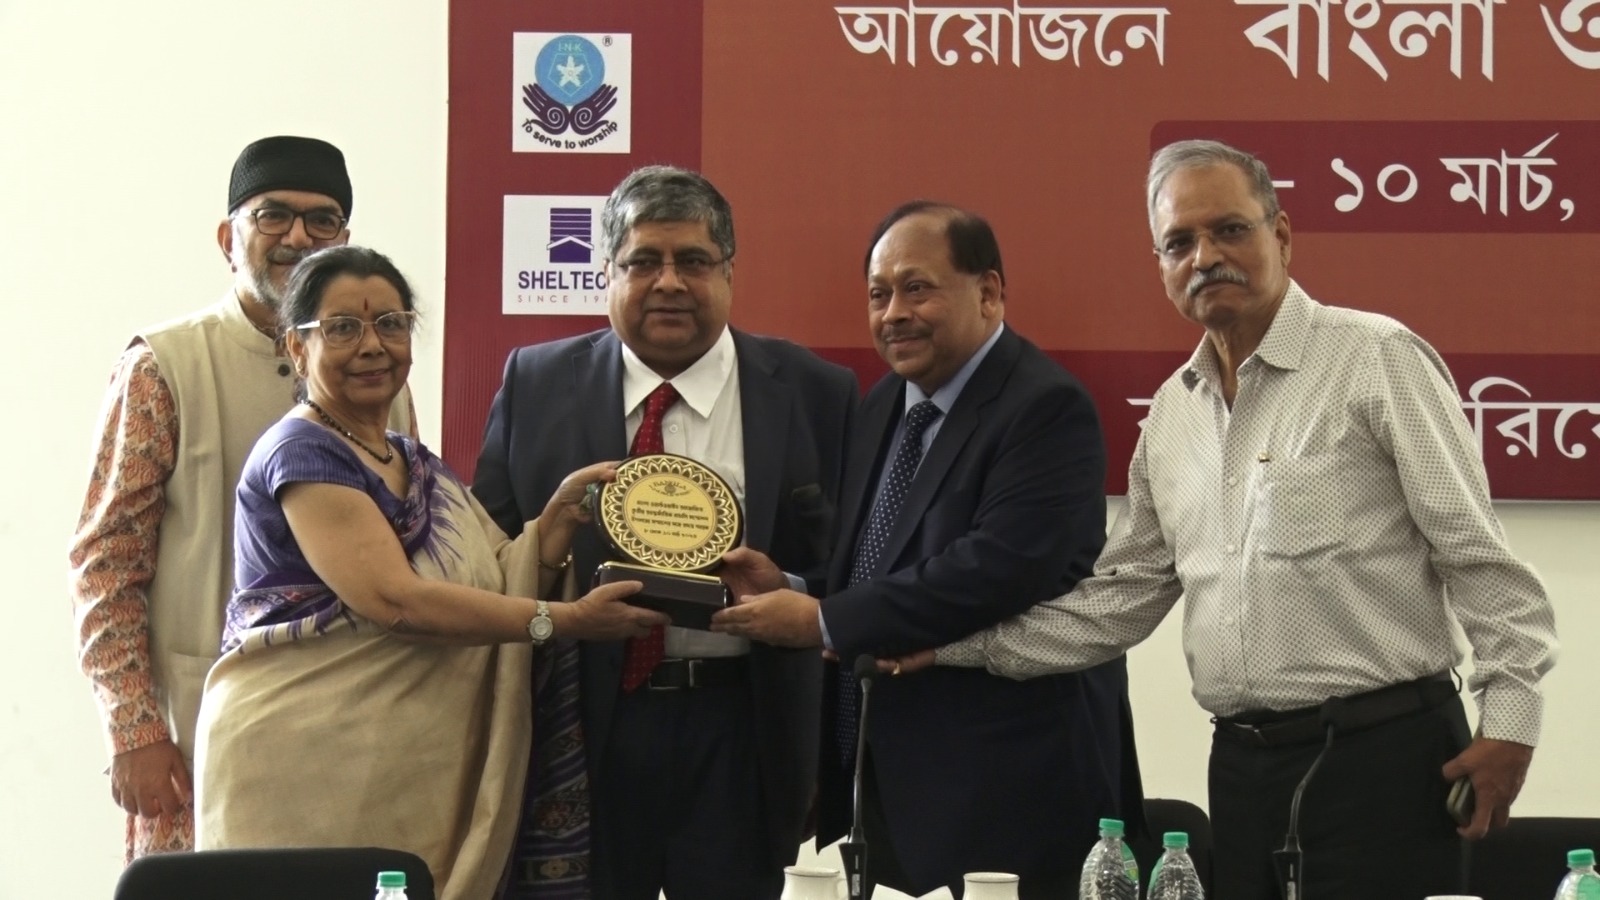 A Speech on Legal Aid by Honourable High Court Judge Mr. Justice I.P. Mukherjee on 3rd International Bengali Conference organized by Bangla Worldwide